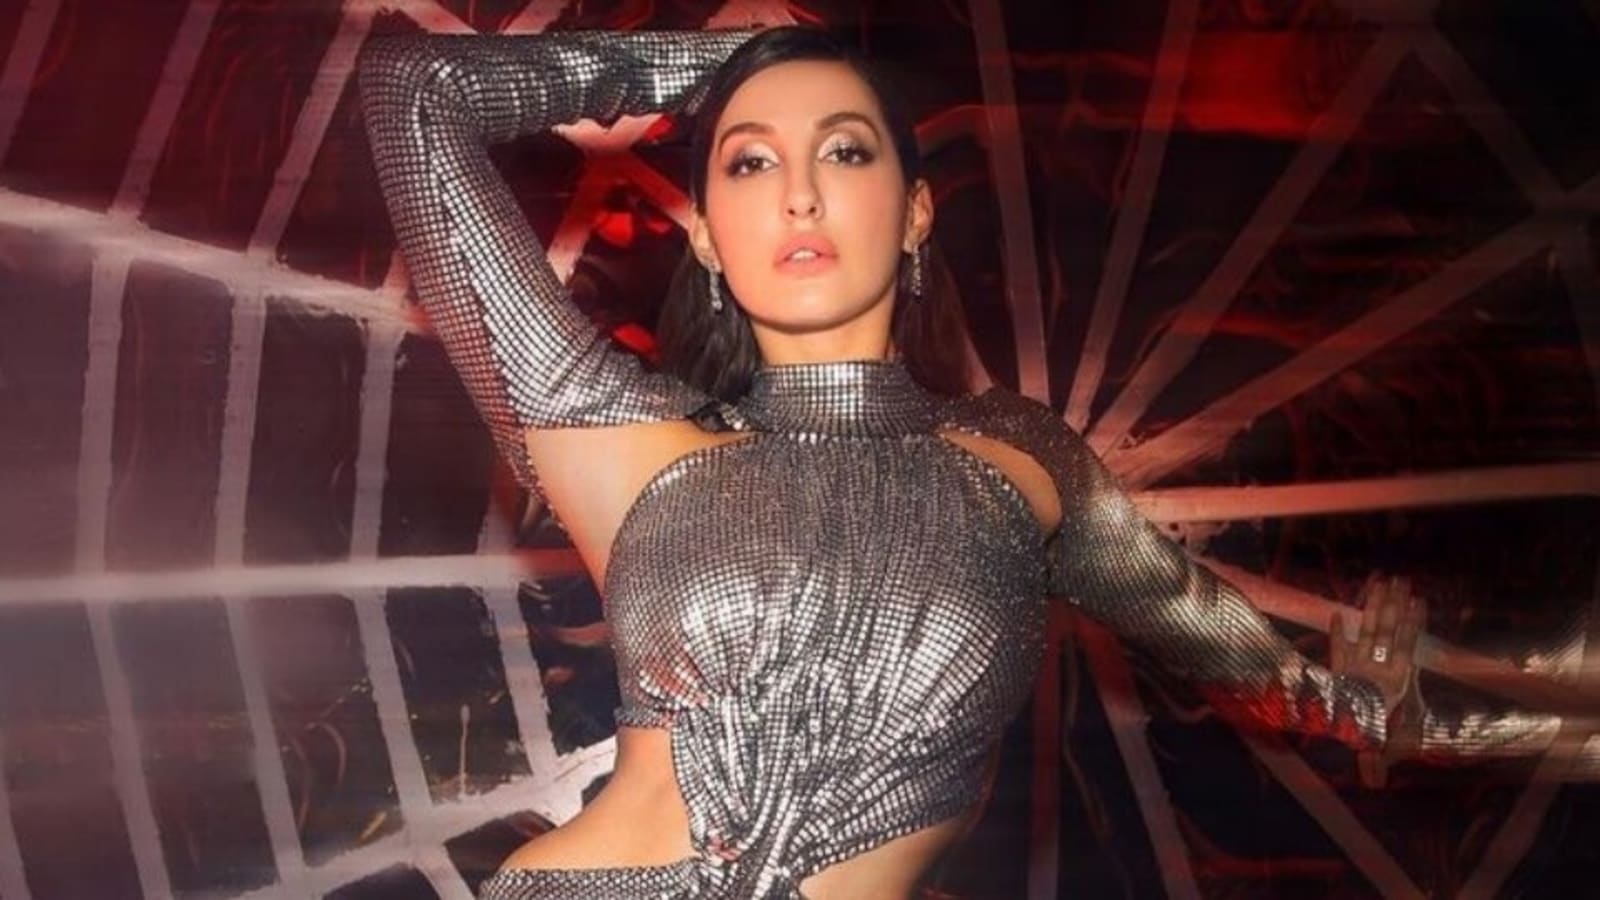 PICS: Nora Fatehi Raises Heat As She Steps Out In Bodycon Outfit